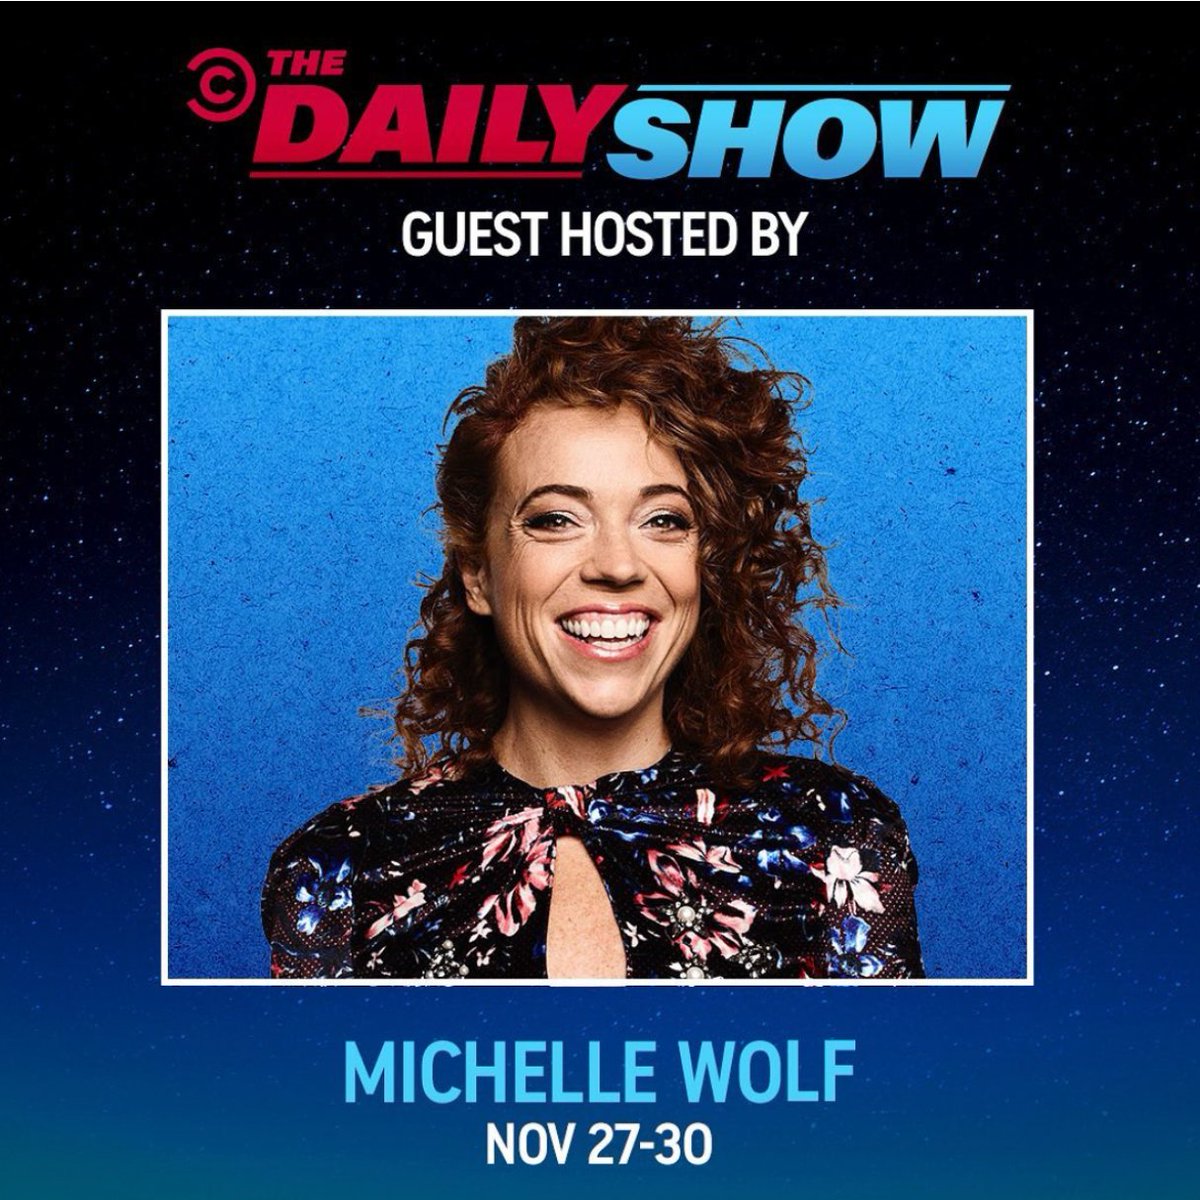 If you missed her when she rocked @TownHallNYC at the New York Comedy Festival earlier this month, you’ll want to catch the hilarious @michelleisawolf when she hosts @thedailyshow on @comedycentral all next week!  #makeNYlaugh